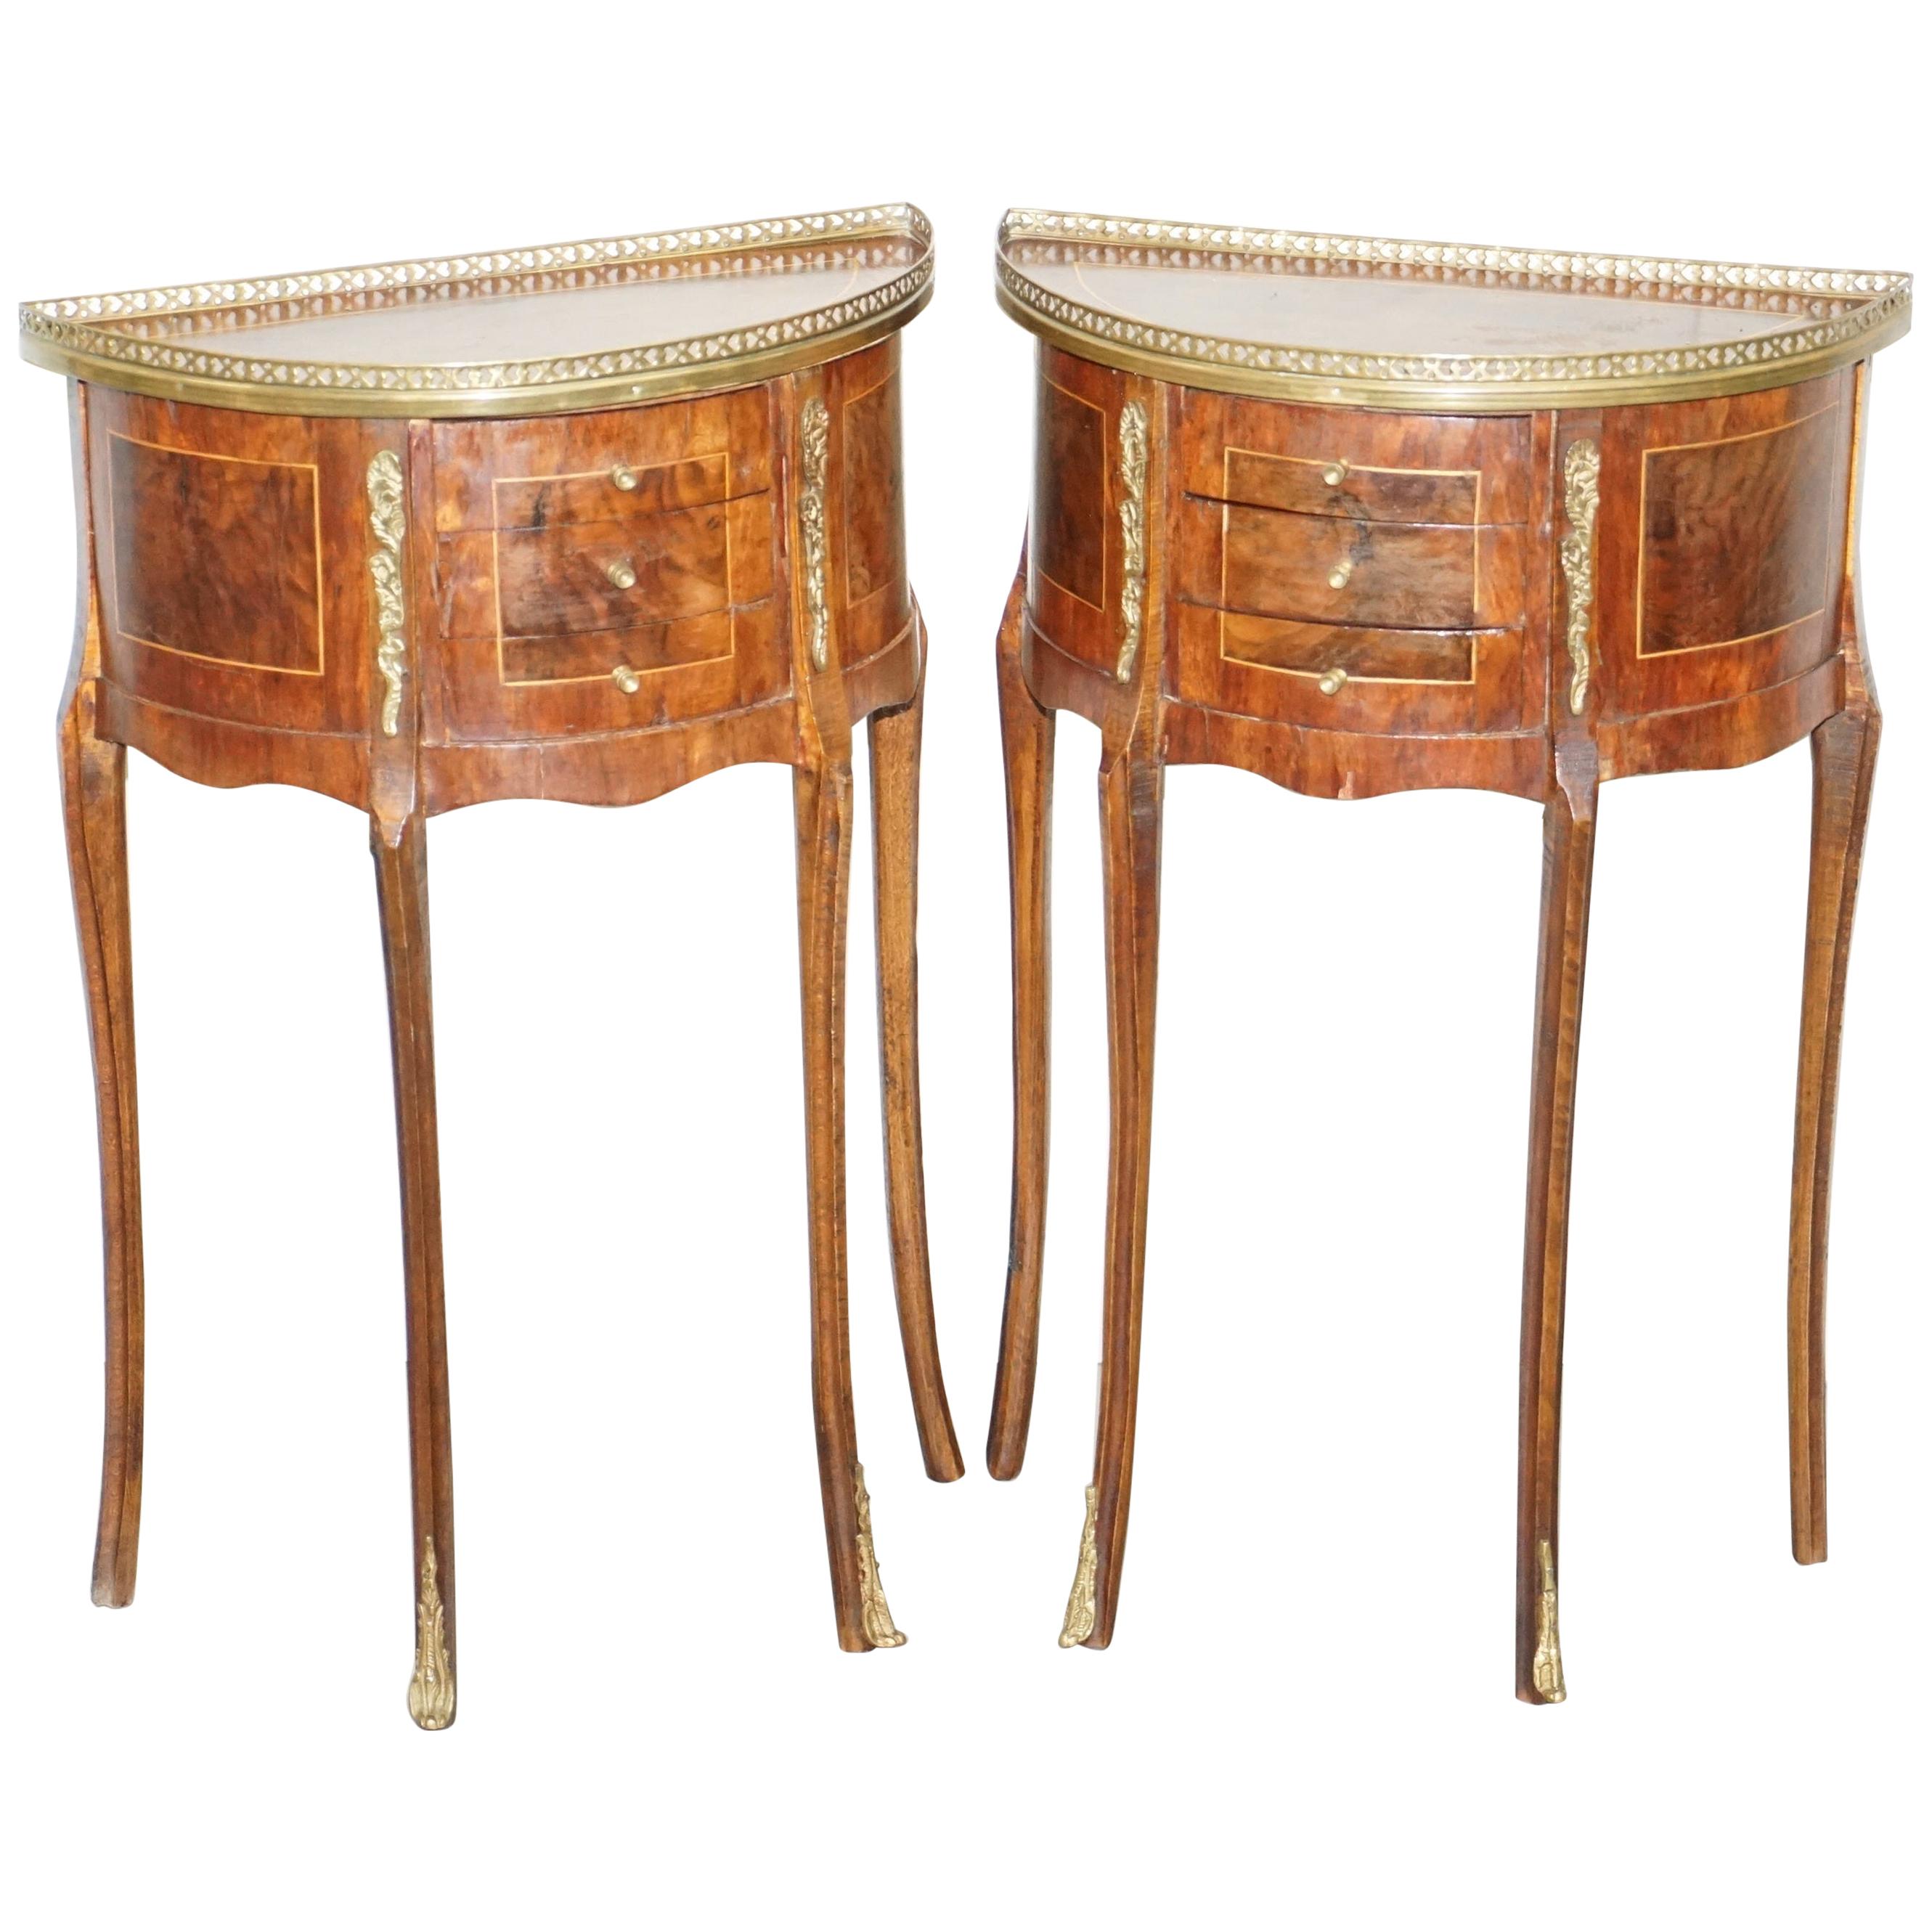 Pair of circa 1900 French Burr Walnut Brass Gallery Rail Demilune Side Tables